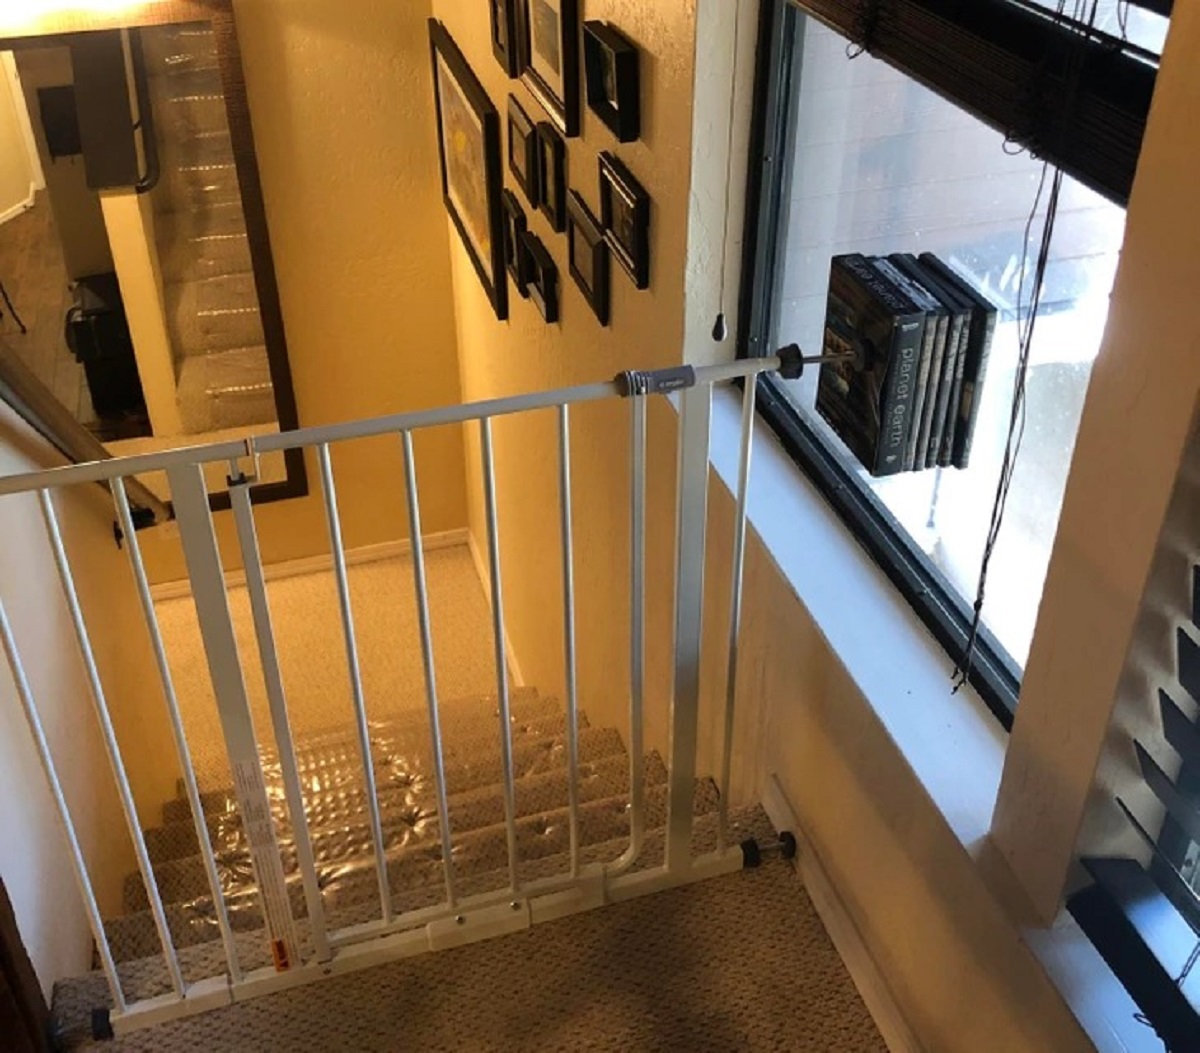 “My landlord assured me they have a ‘very safe’ baby gate.”